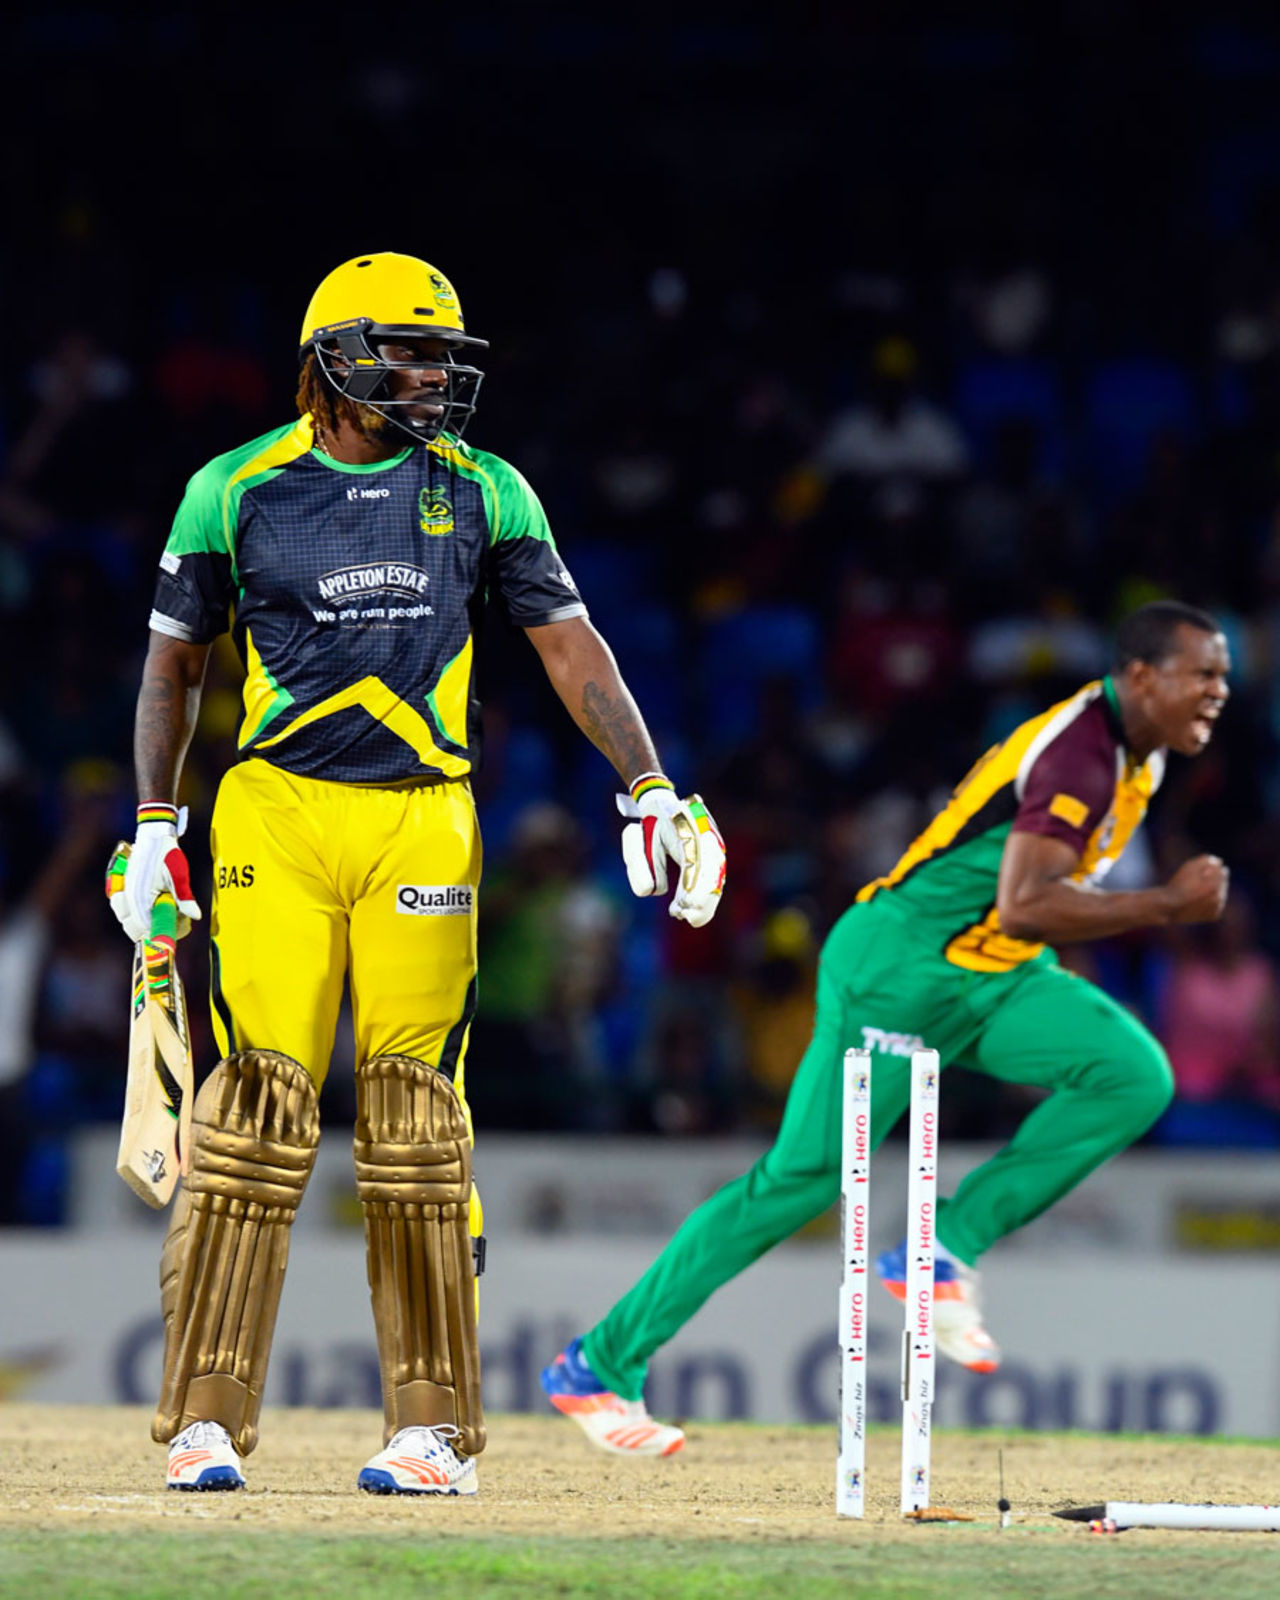 Wild celebrations erupt after Chris Gayle is bowled, Guyana Amazon Warriors v Jamaica Tallawahs, CPL 2016, 1st playoff, St Kitts, August 3, 2016